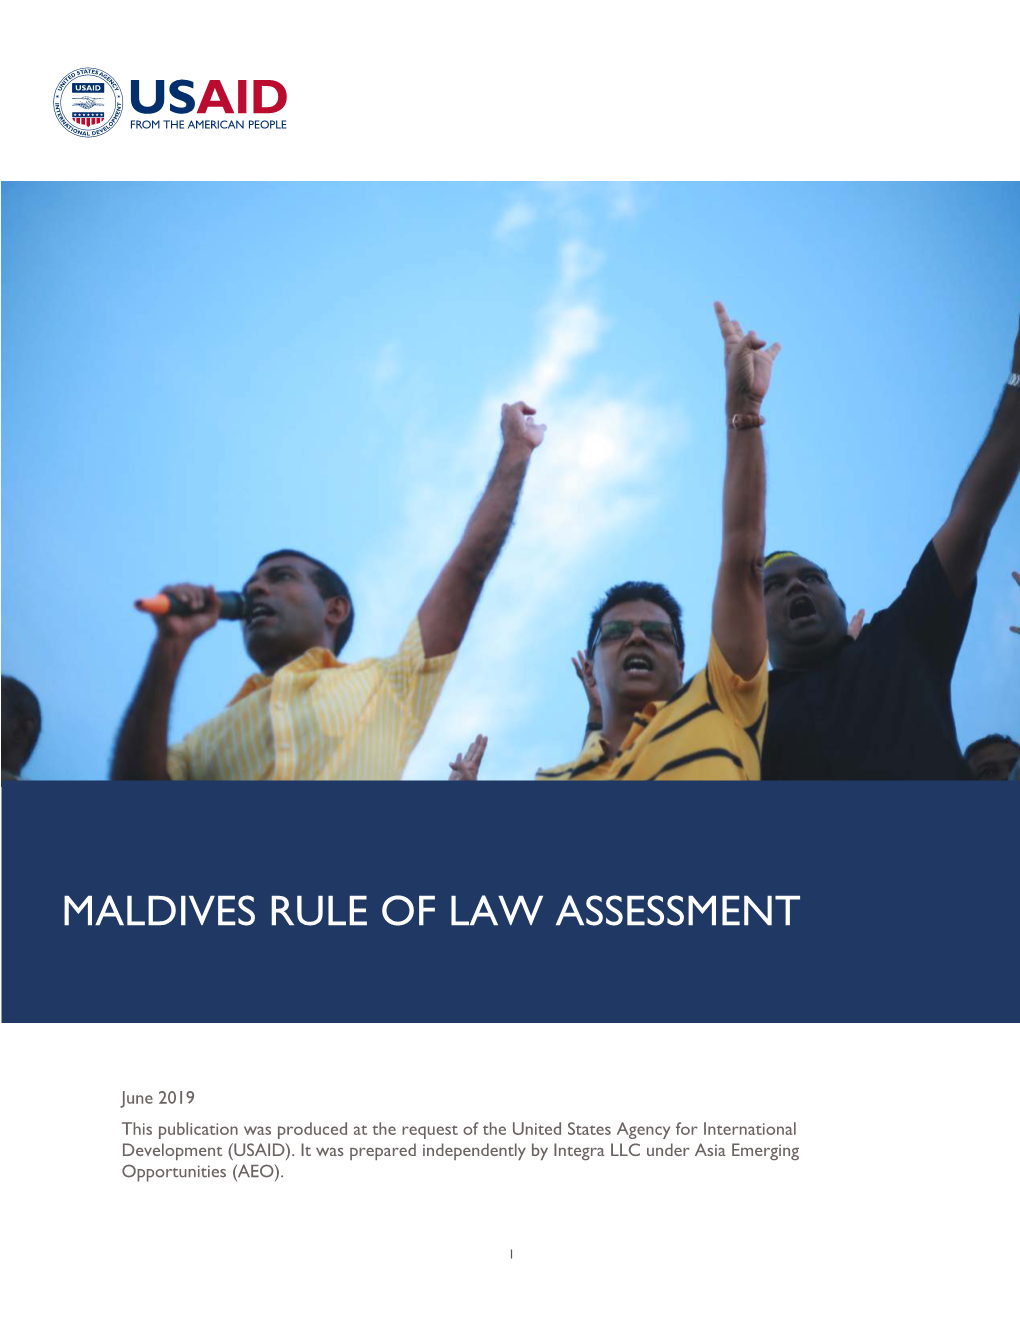 Maldives Rule of Law Assessment